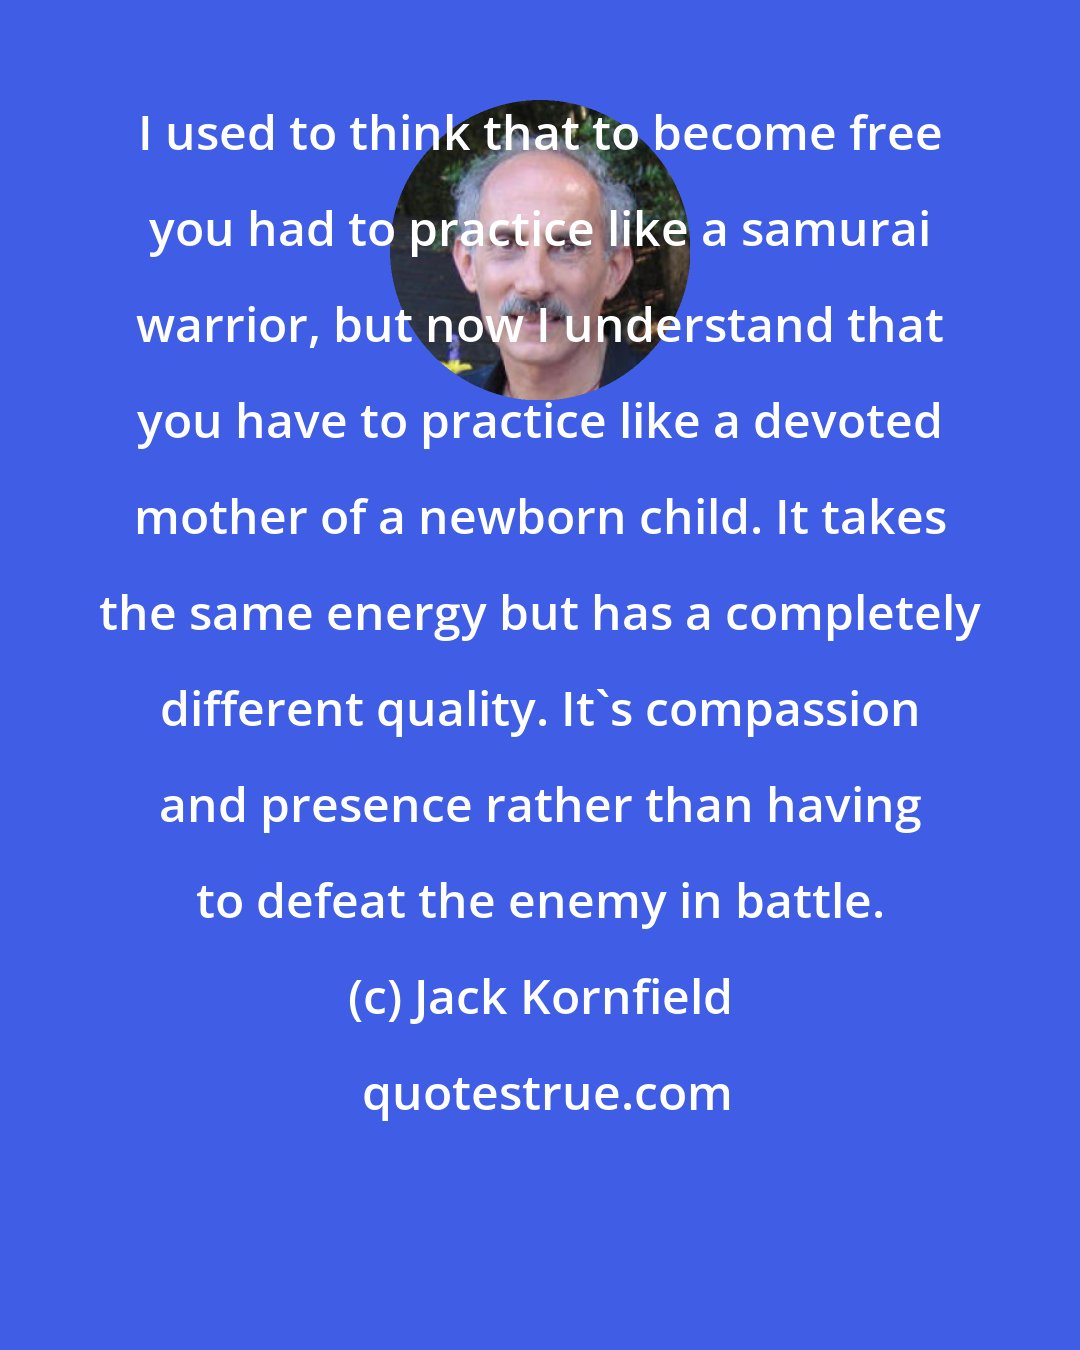 Jack Kornfield: I used to think that to become free you had to practice like a samurai warrior, but now I understand that you have to practice like a devoted mother of a newborn child. It takes the same energy but has a completely different quality. It's compassion and presence rather than having to defeat the enemy in battle.